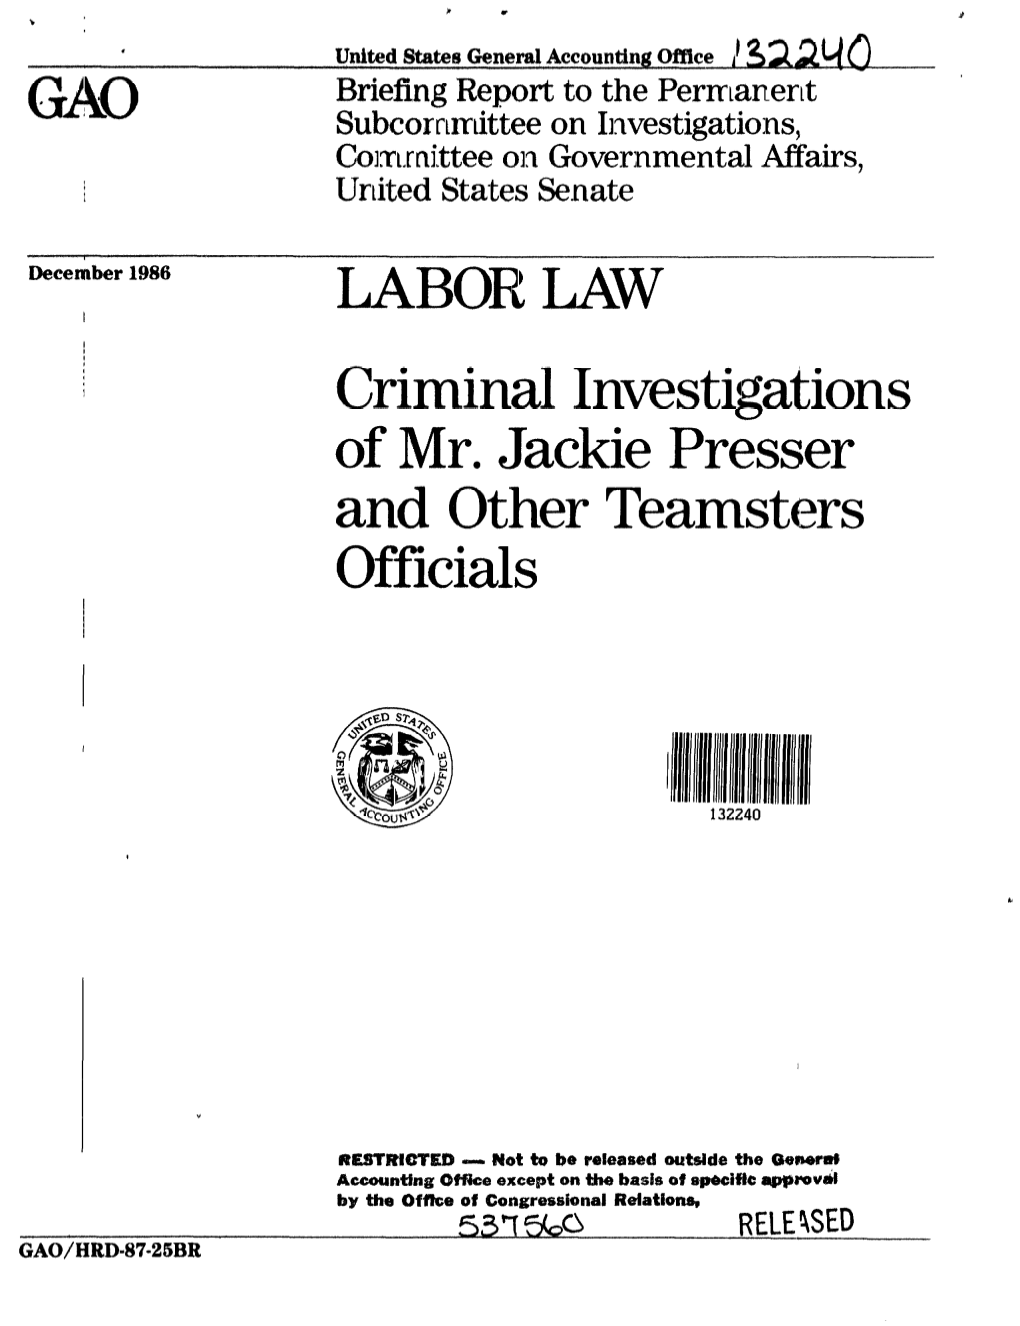 Criminal Investigations of Mr. Jackie Presser and Other Teamsters Officials